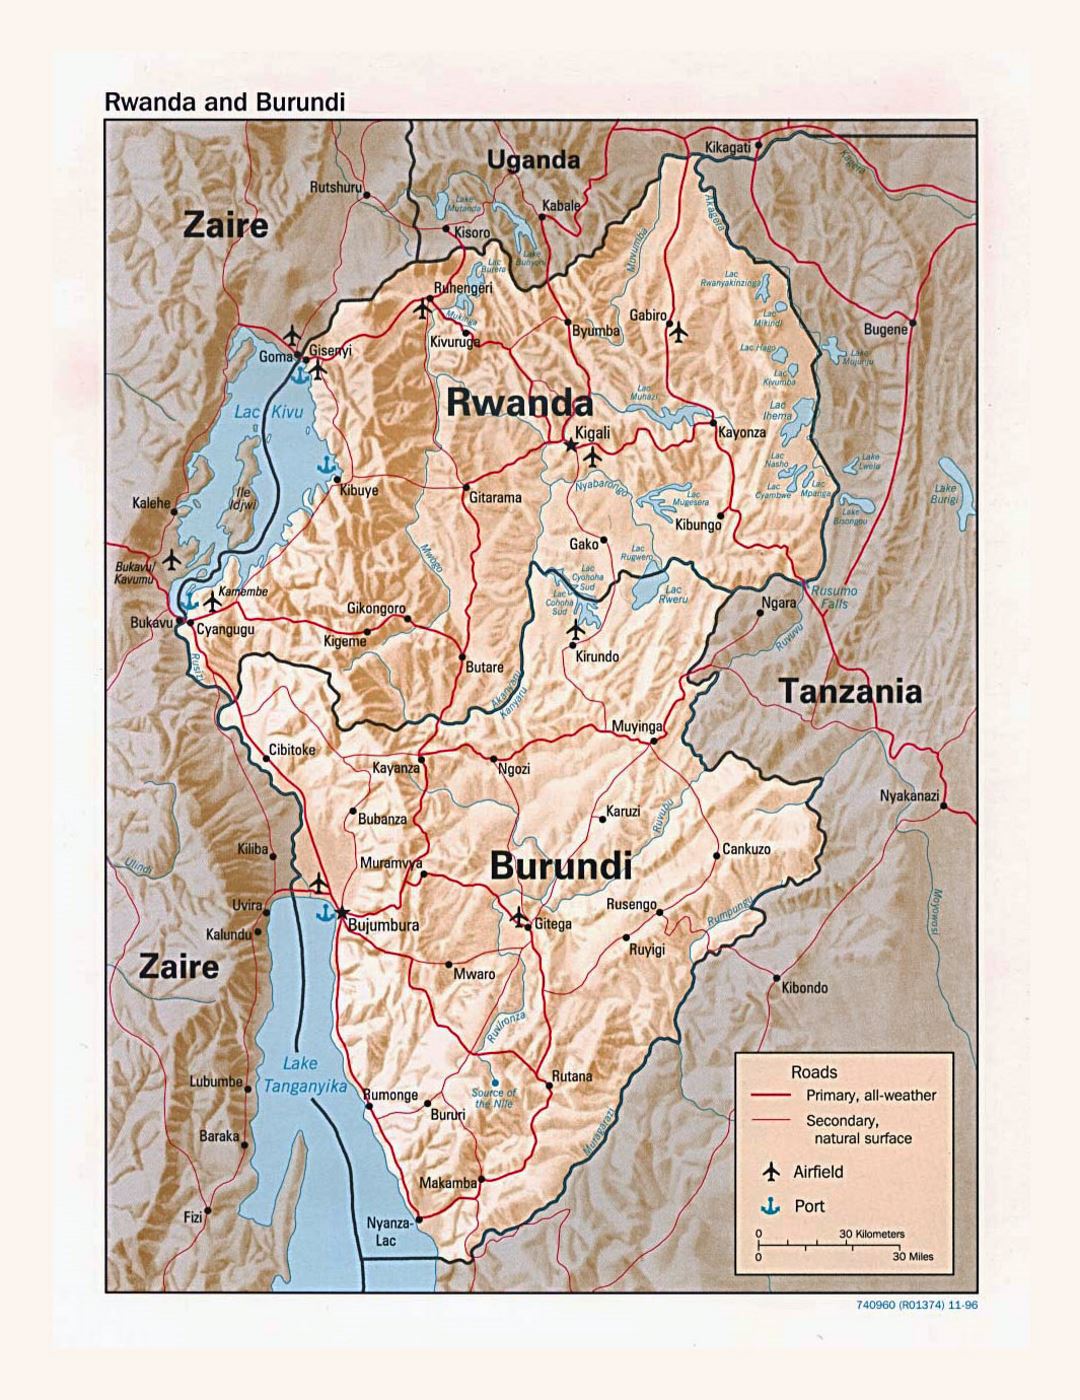 Detailed political map of Rwanda and Burundi with relief, roads, major cities, airports and ports - 1996